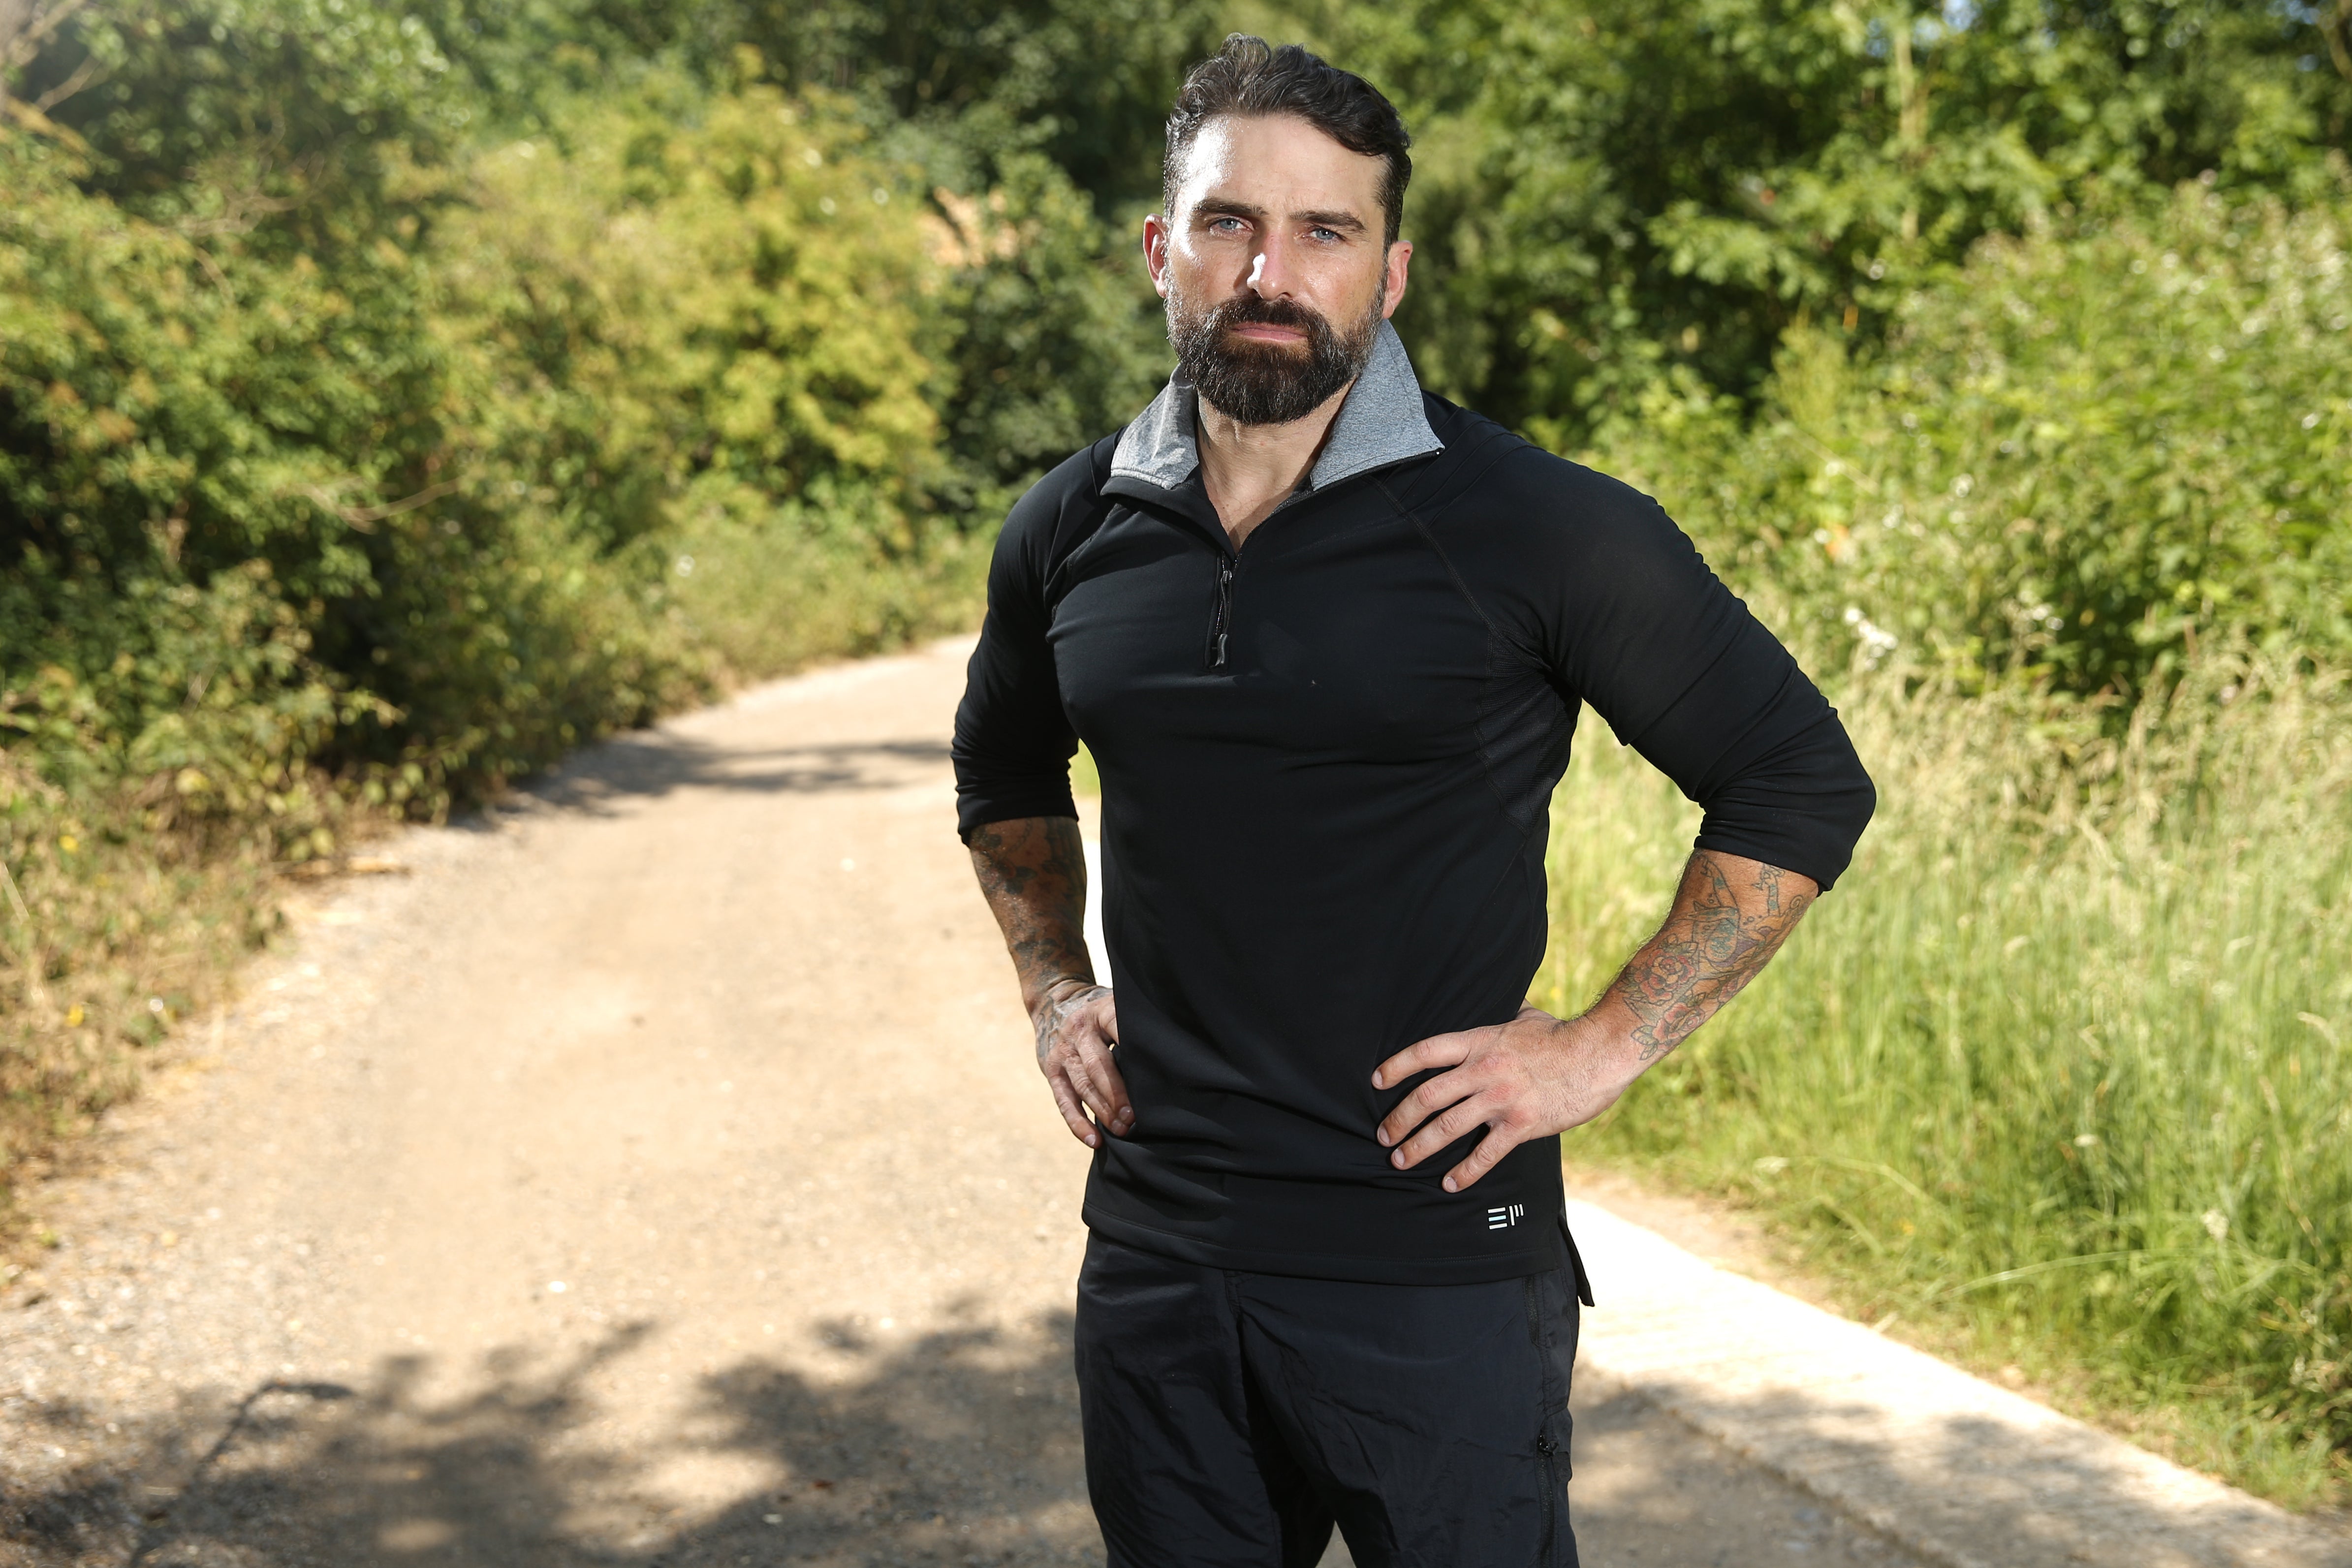 Ant Middleton in Oxford promo photo for Past Booker presale offer code